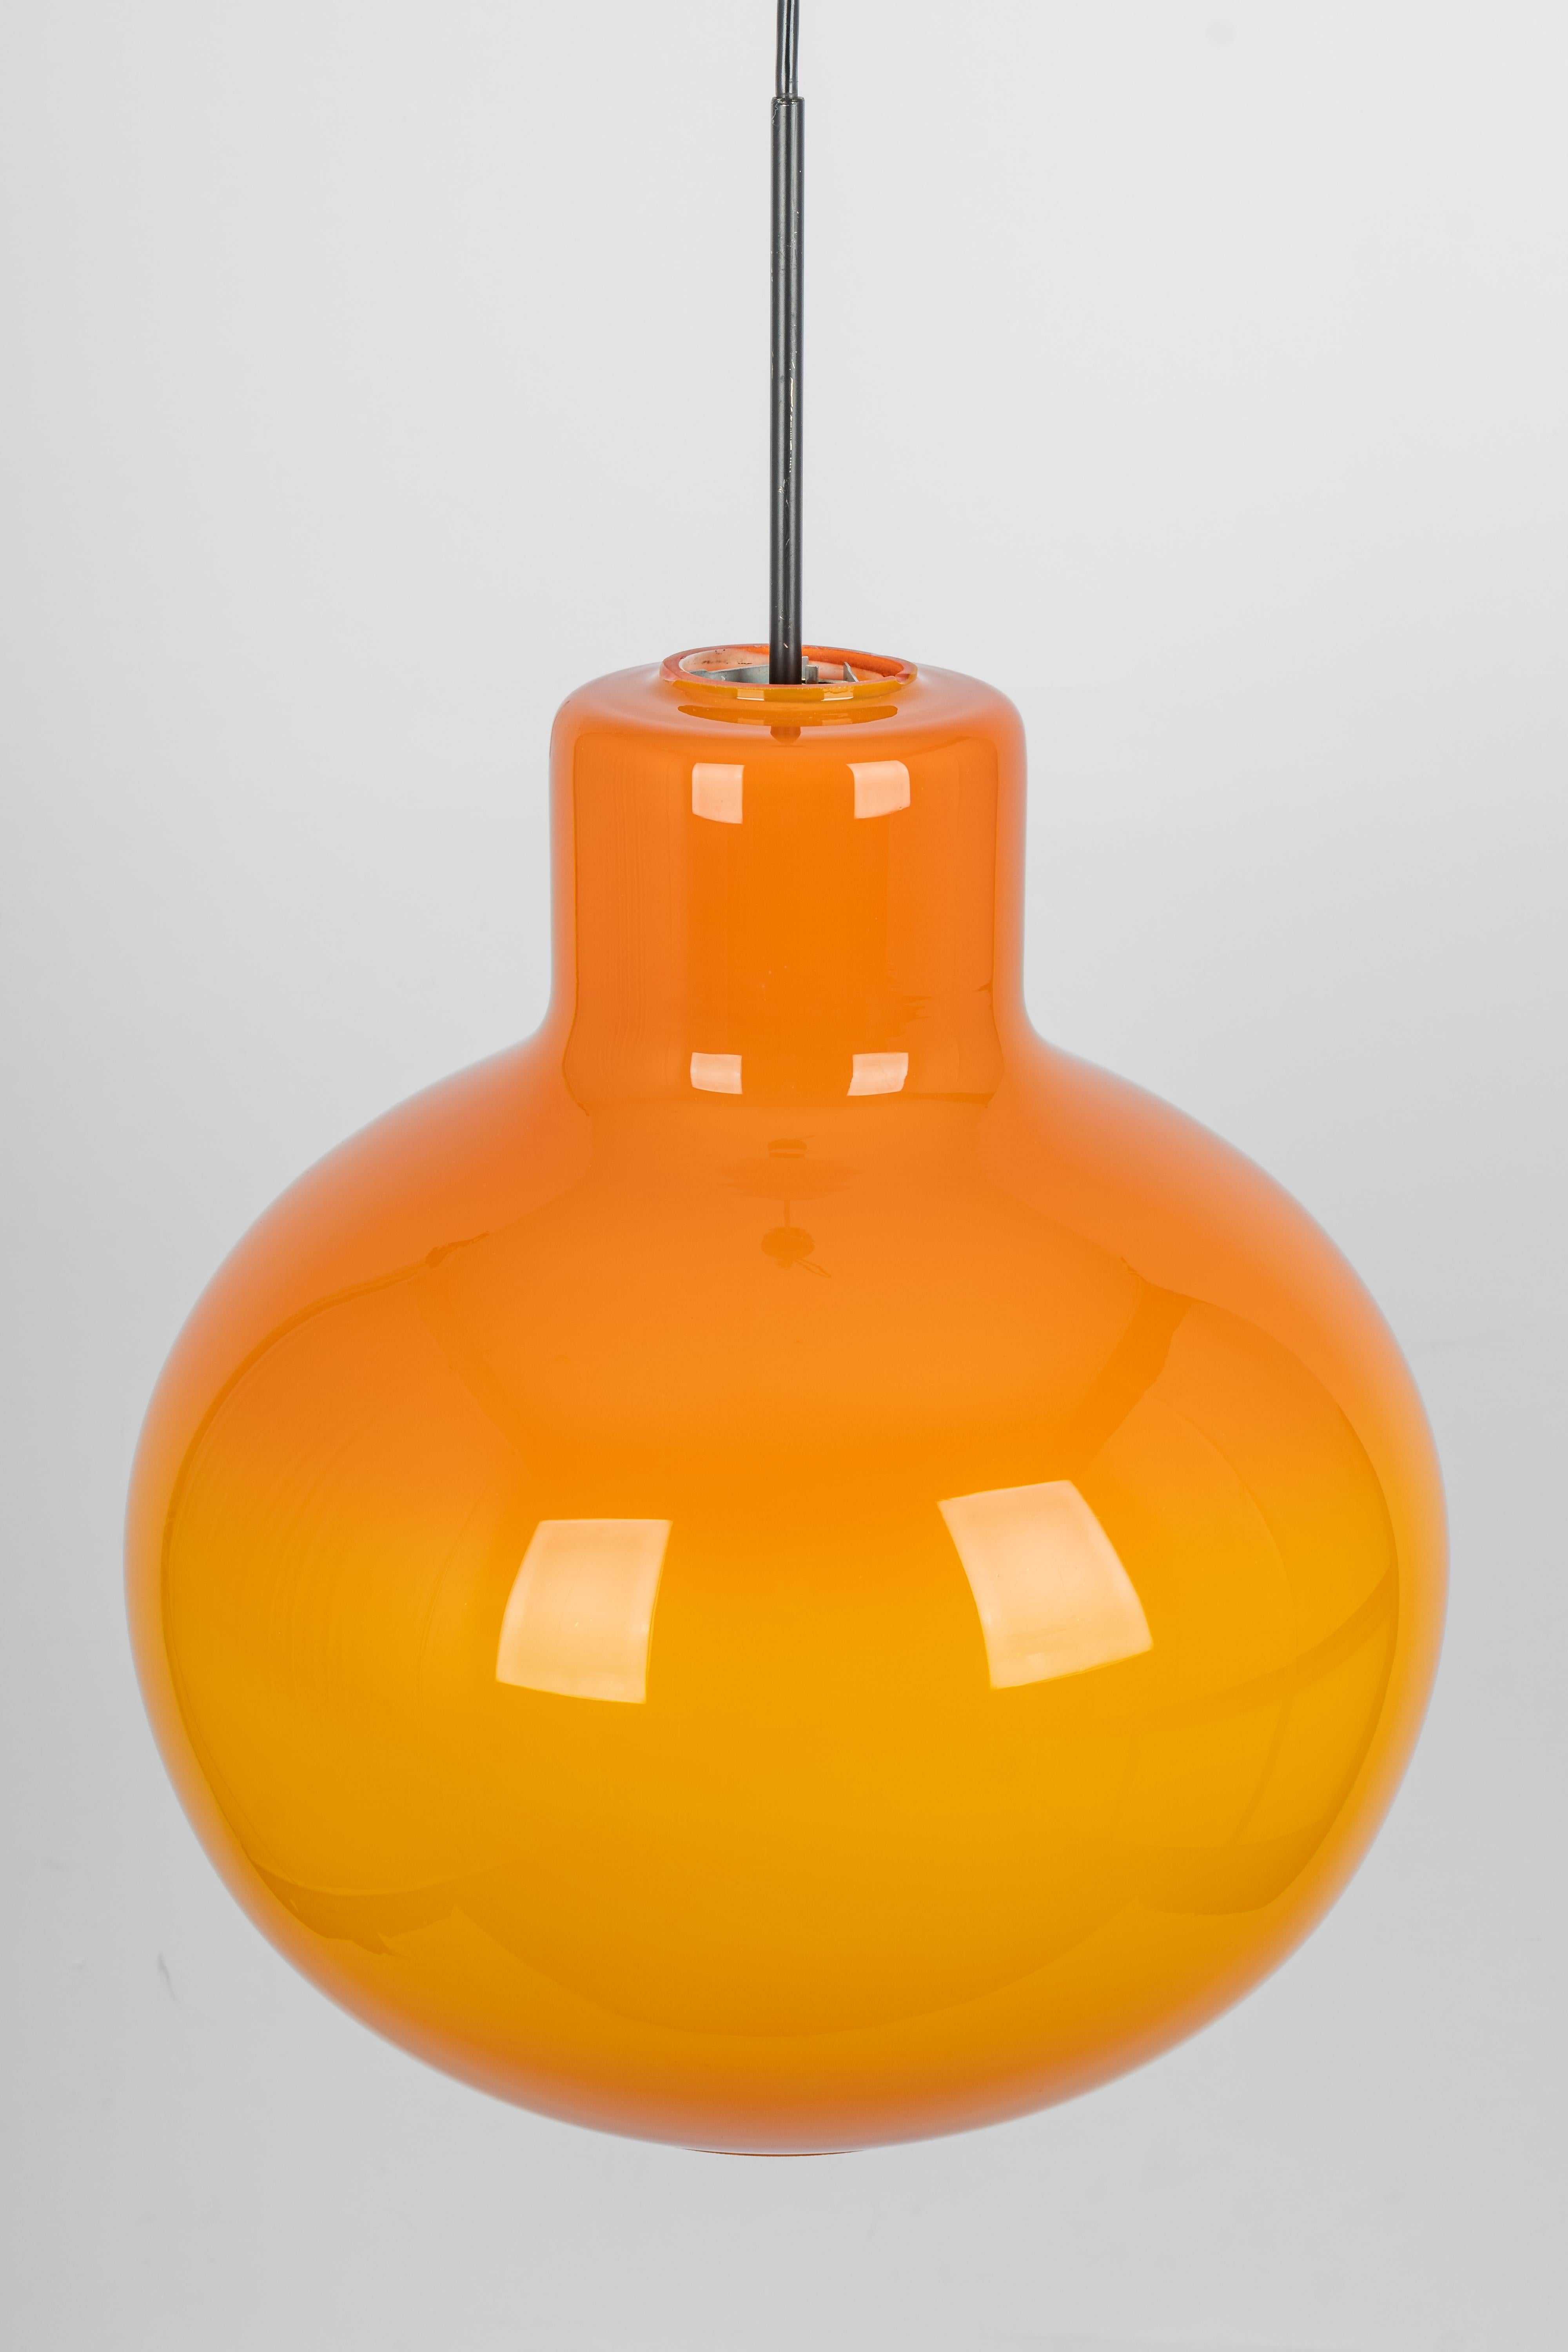 Late 20th Century 1 of 3 Large Opal Orange Ball Pendant Light by Doria, Germany, 1970s For Sale